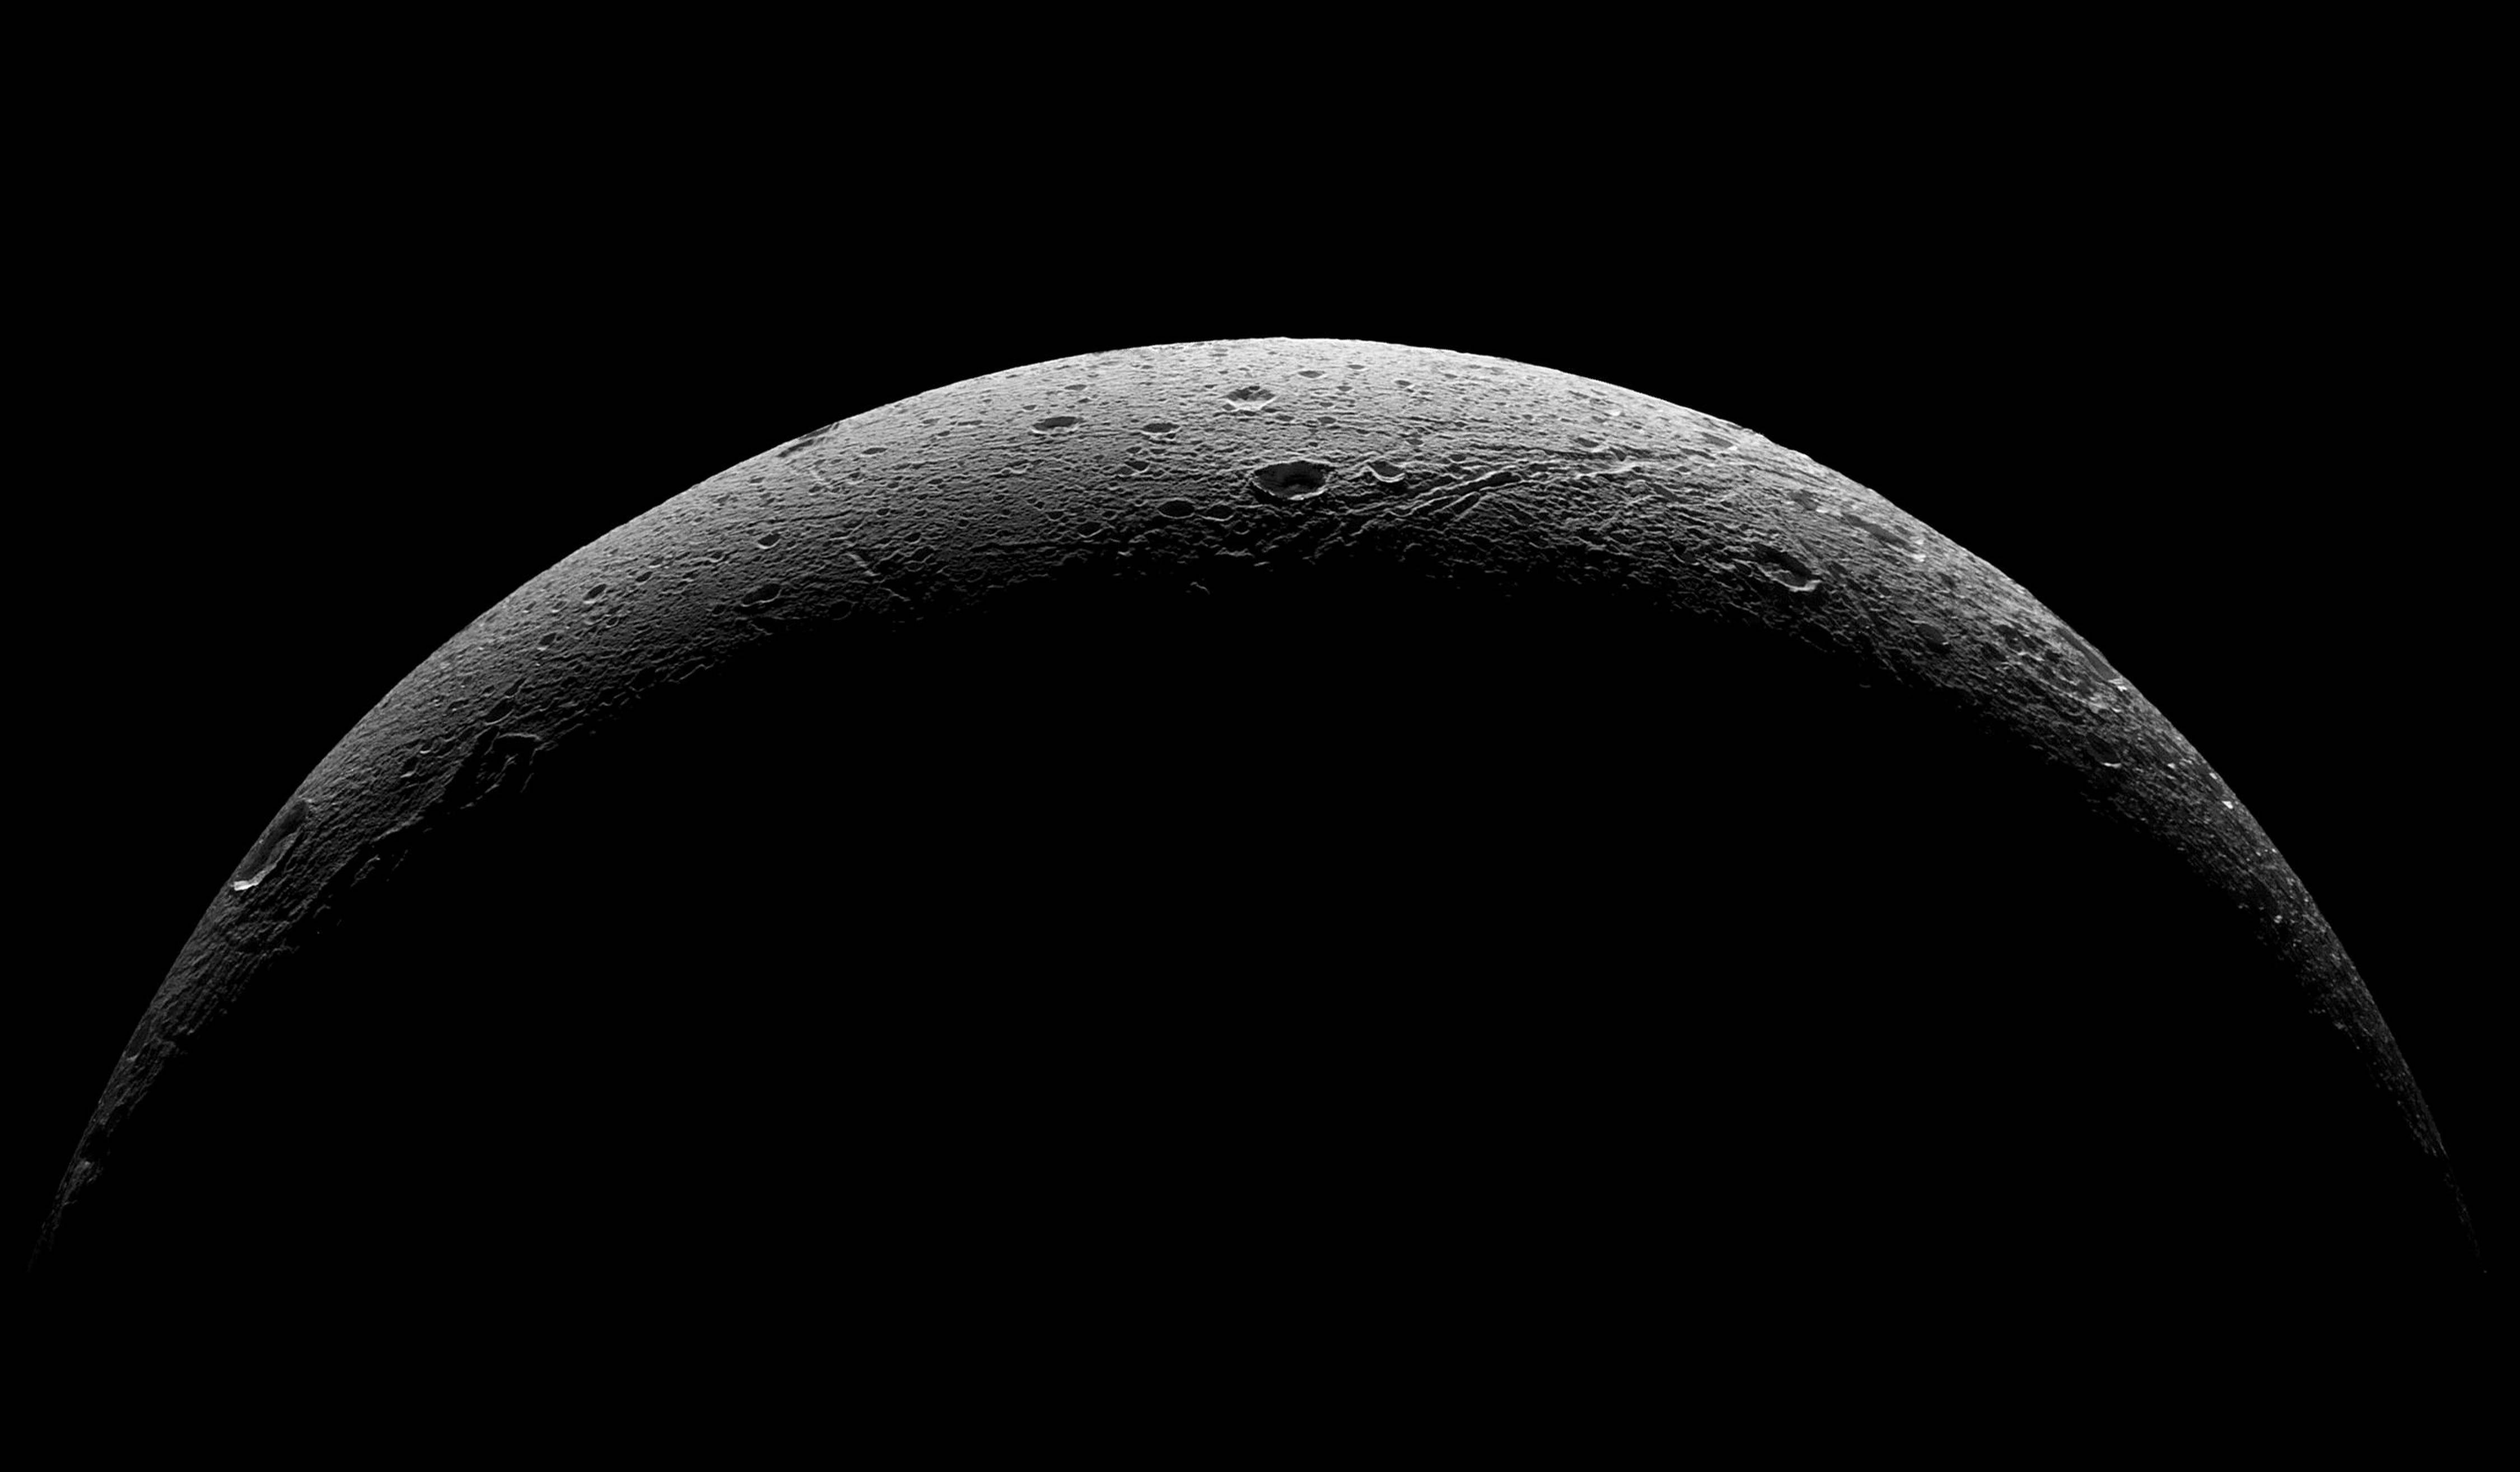 This NASA handout released August 20, 2015 shows the rough and icy crescent of Saturn's moon Dione in this view taken by NASA's Cassini spacecraft on the outbound leg of its last close flyby of the icy moon. North on Dione is up. The image was obtained in visible light with the Cassini spacecraft wide-angle camera on August 17, 2015. The view was acquired at distances ranging from approximately 37,000 miles (59,000 kilometers) to 47,000 miles (75,000 kilometers) from Dione  == RESTRICTED TO EDITORIAL USE / MANDATORY CREDIT: "AFP PHOTO / HANDOUT / NASA/JPL-Caltech/Space Science Institute "/ NO MARKETING / NO ADVERTISING CAMPAIGNS / DISTRIBUTED AS A SERVICE TO CLIENTS == / AFP PHOTO / NASA/JPL-Caltech/SSI / --